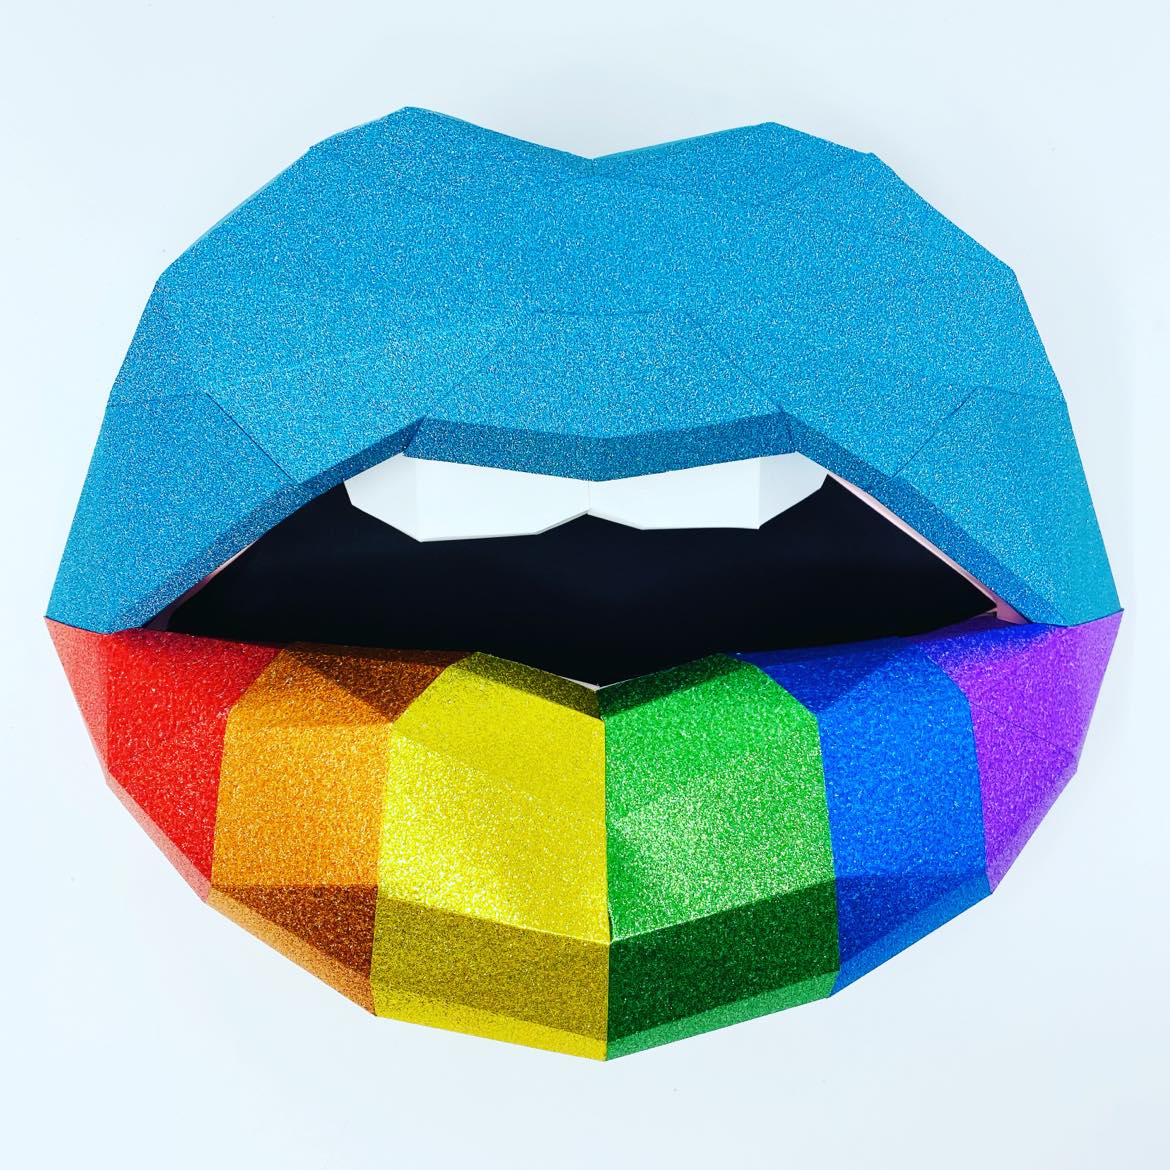 Paper Lips Rainbow  Wall Art for Home Office or Salon | Lippies for Happy Blue Skies | Gift for LGBT Community | Gay Pride Friendship - Pucker Up Lips and Accessories